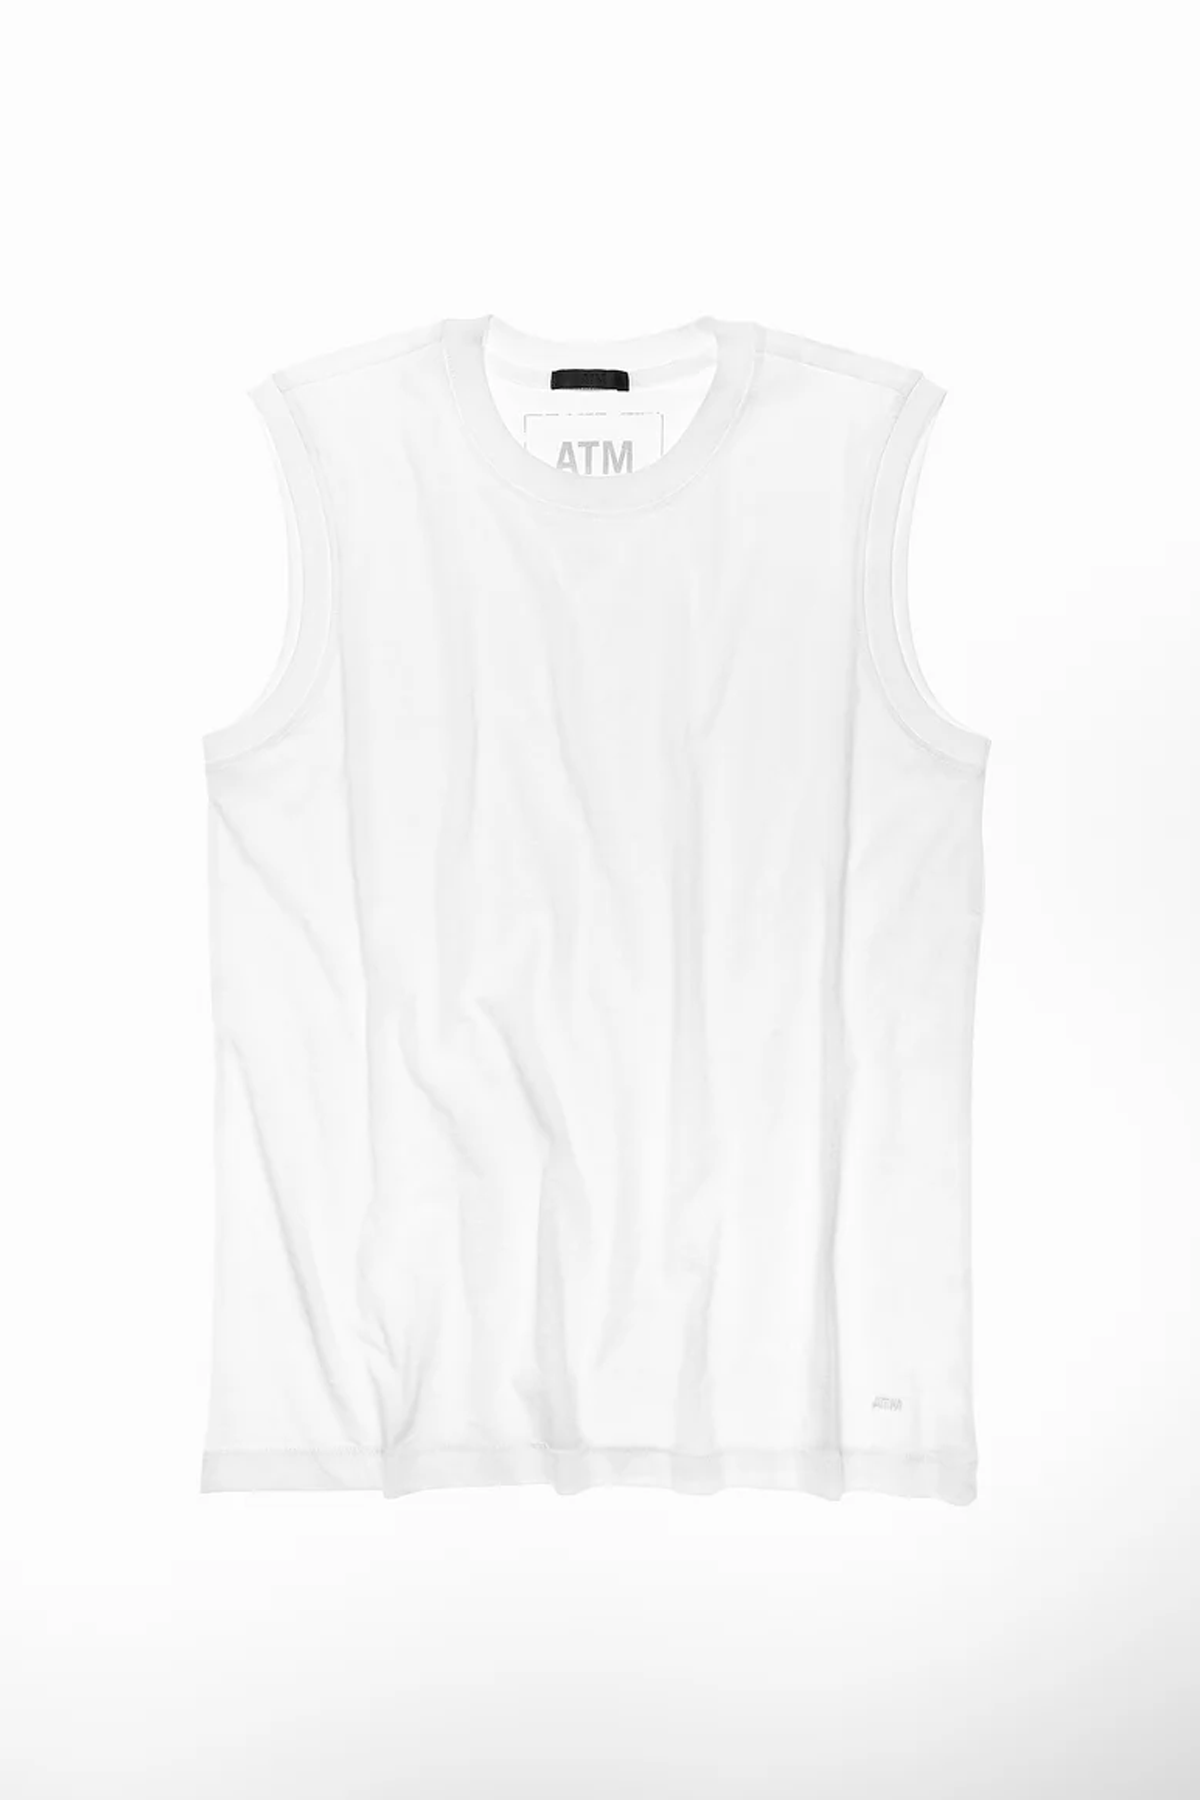 ATM Classic Jersey Sleeveless Muscle Tee